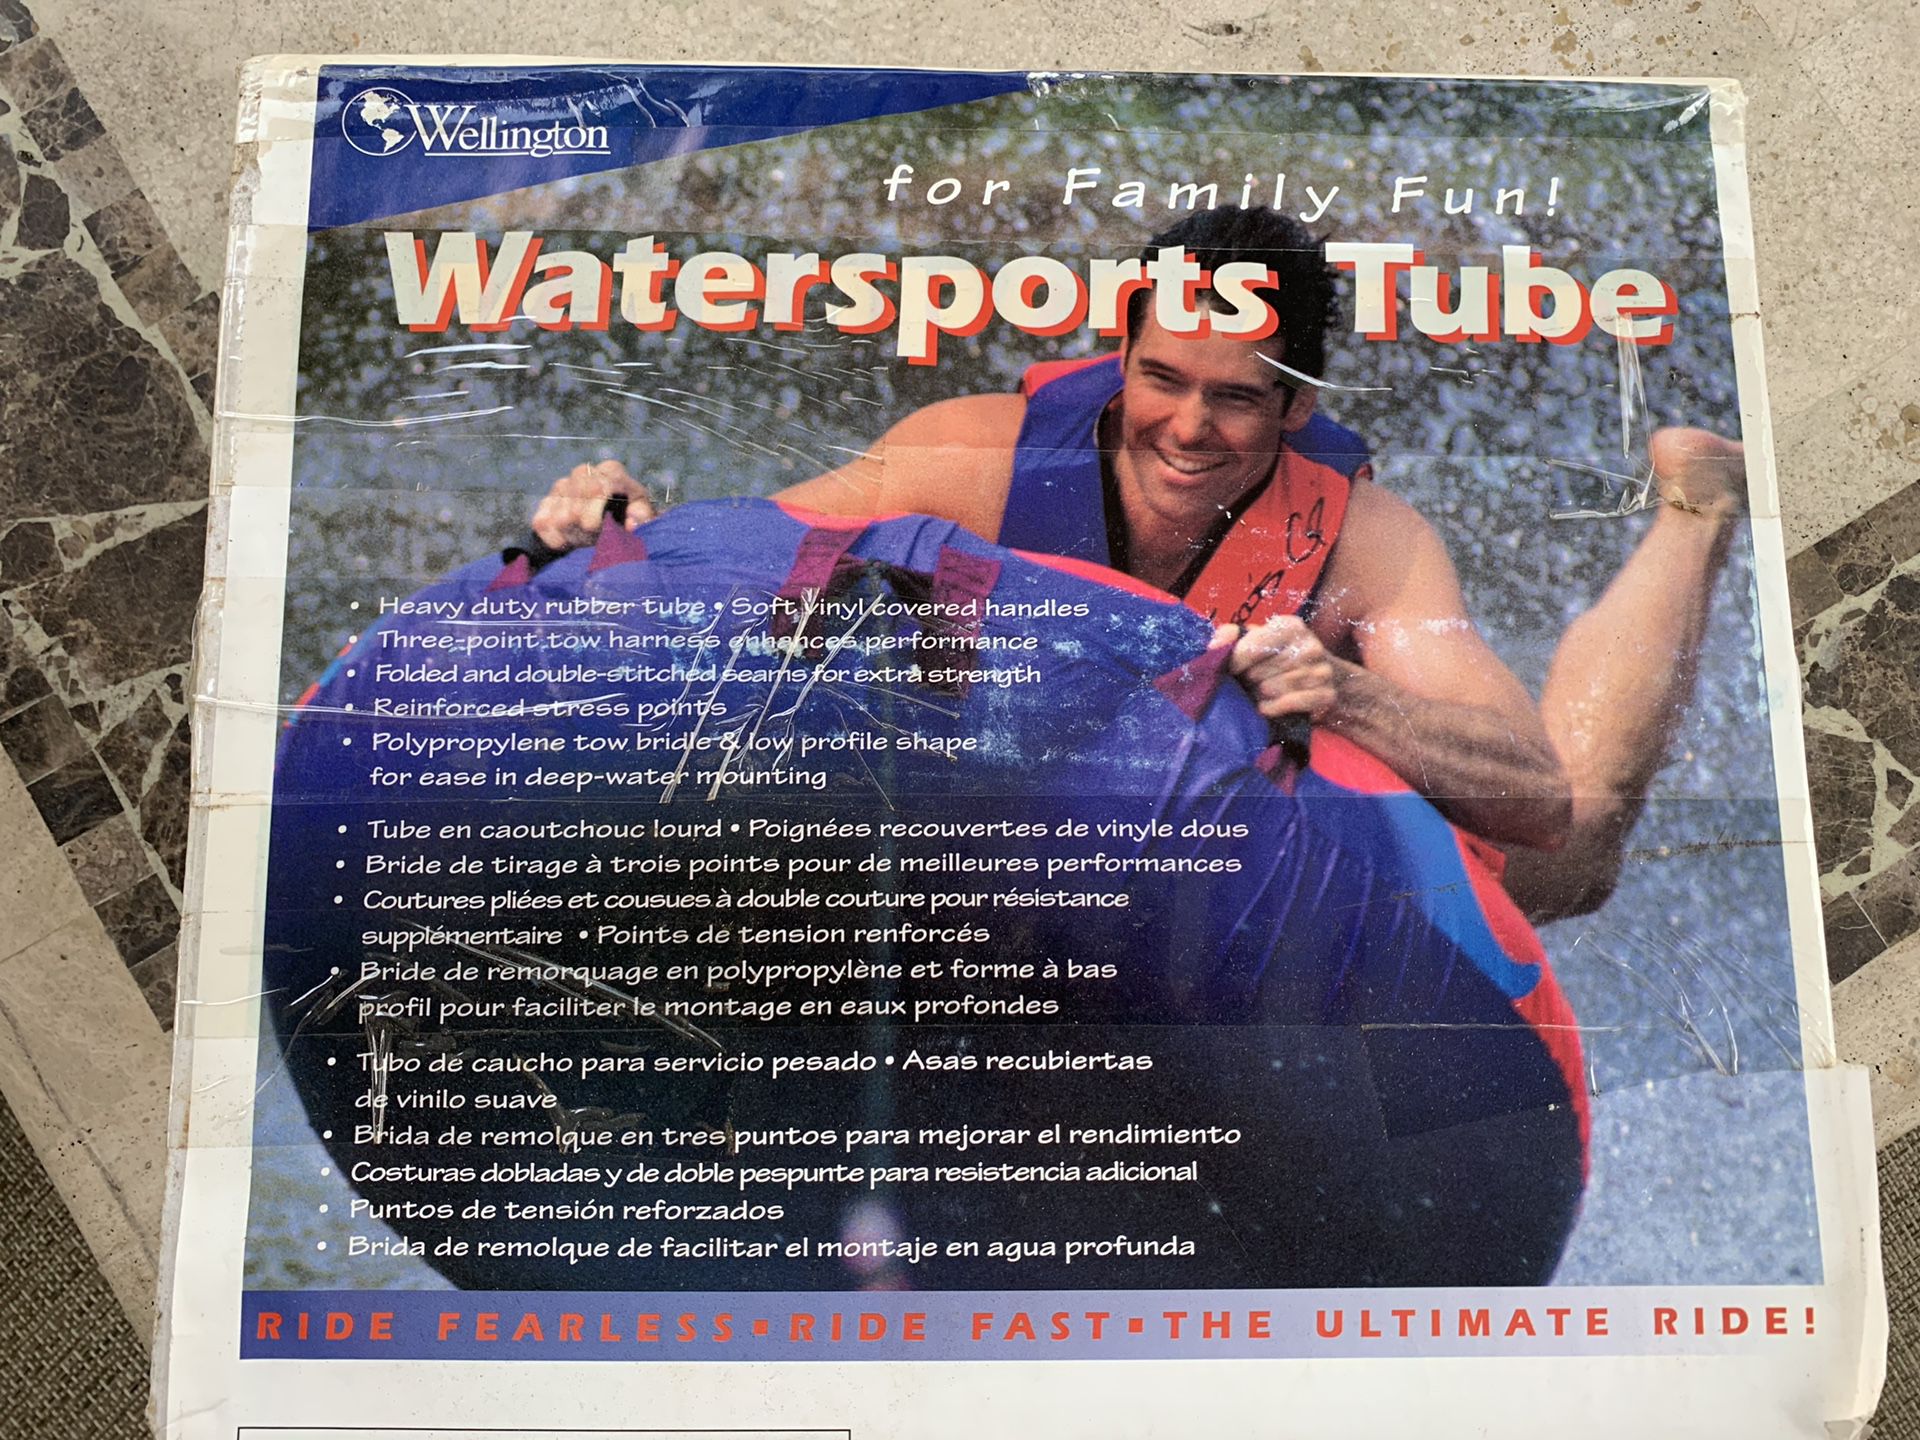 Summertime Water Sports Tube, Boating, Skiing, Swimming Pool